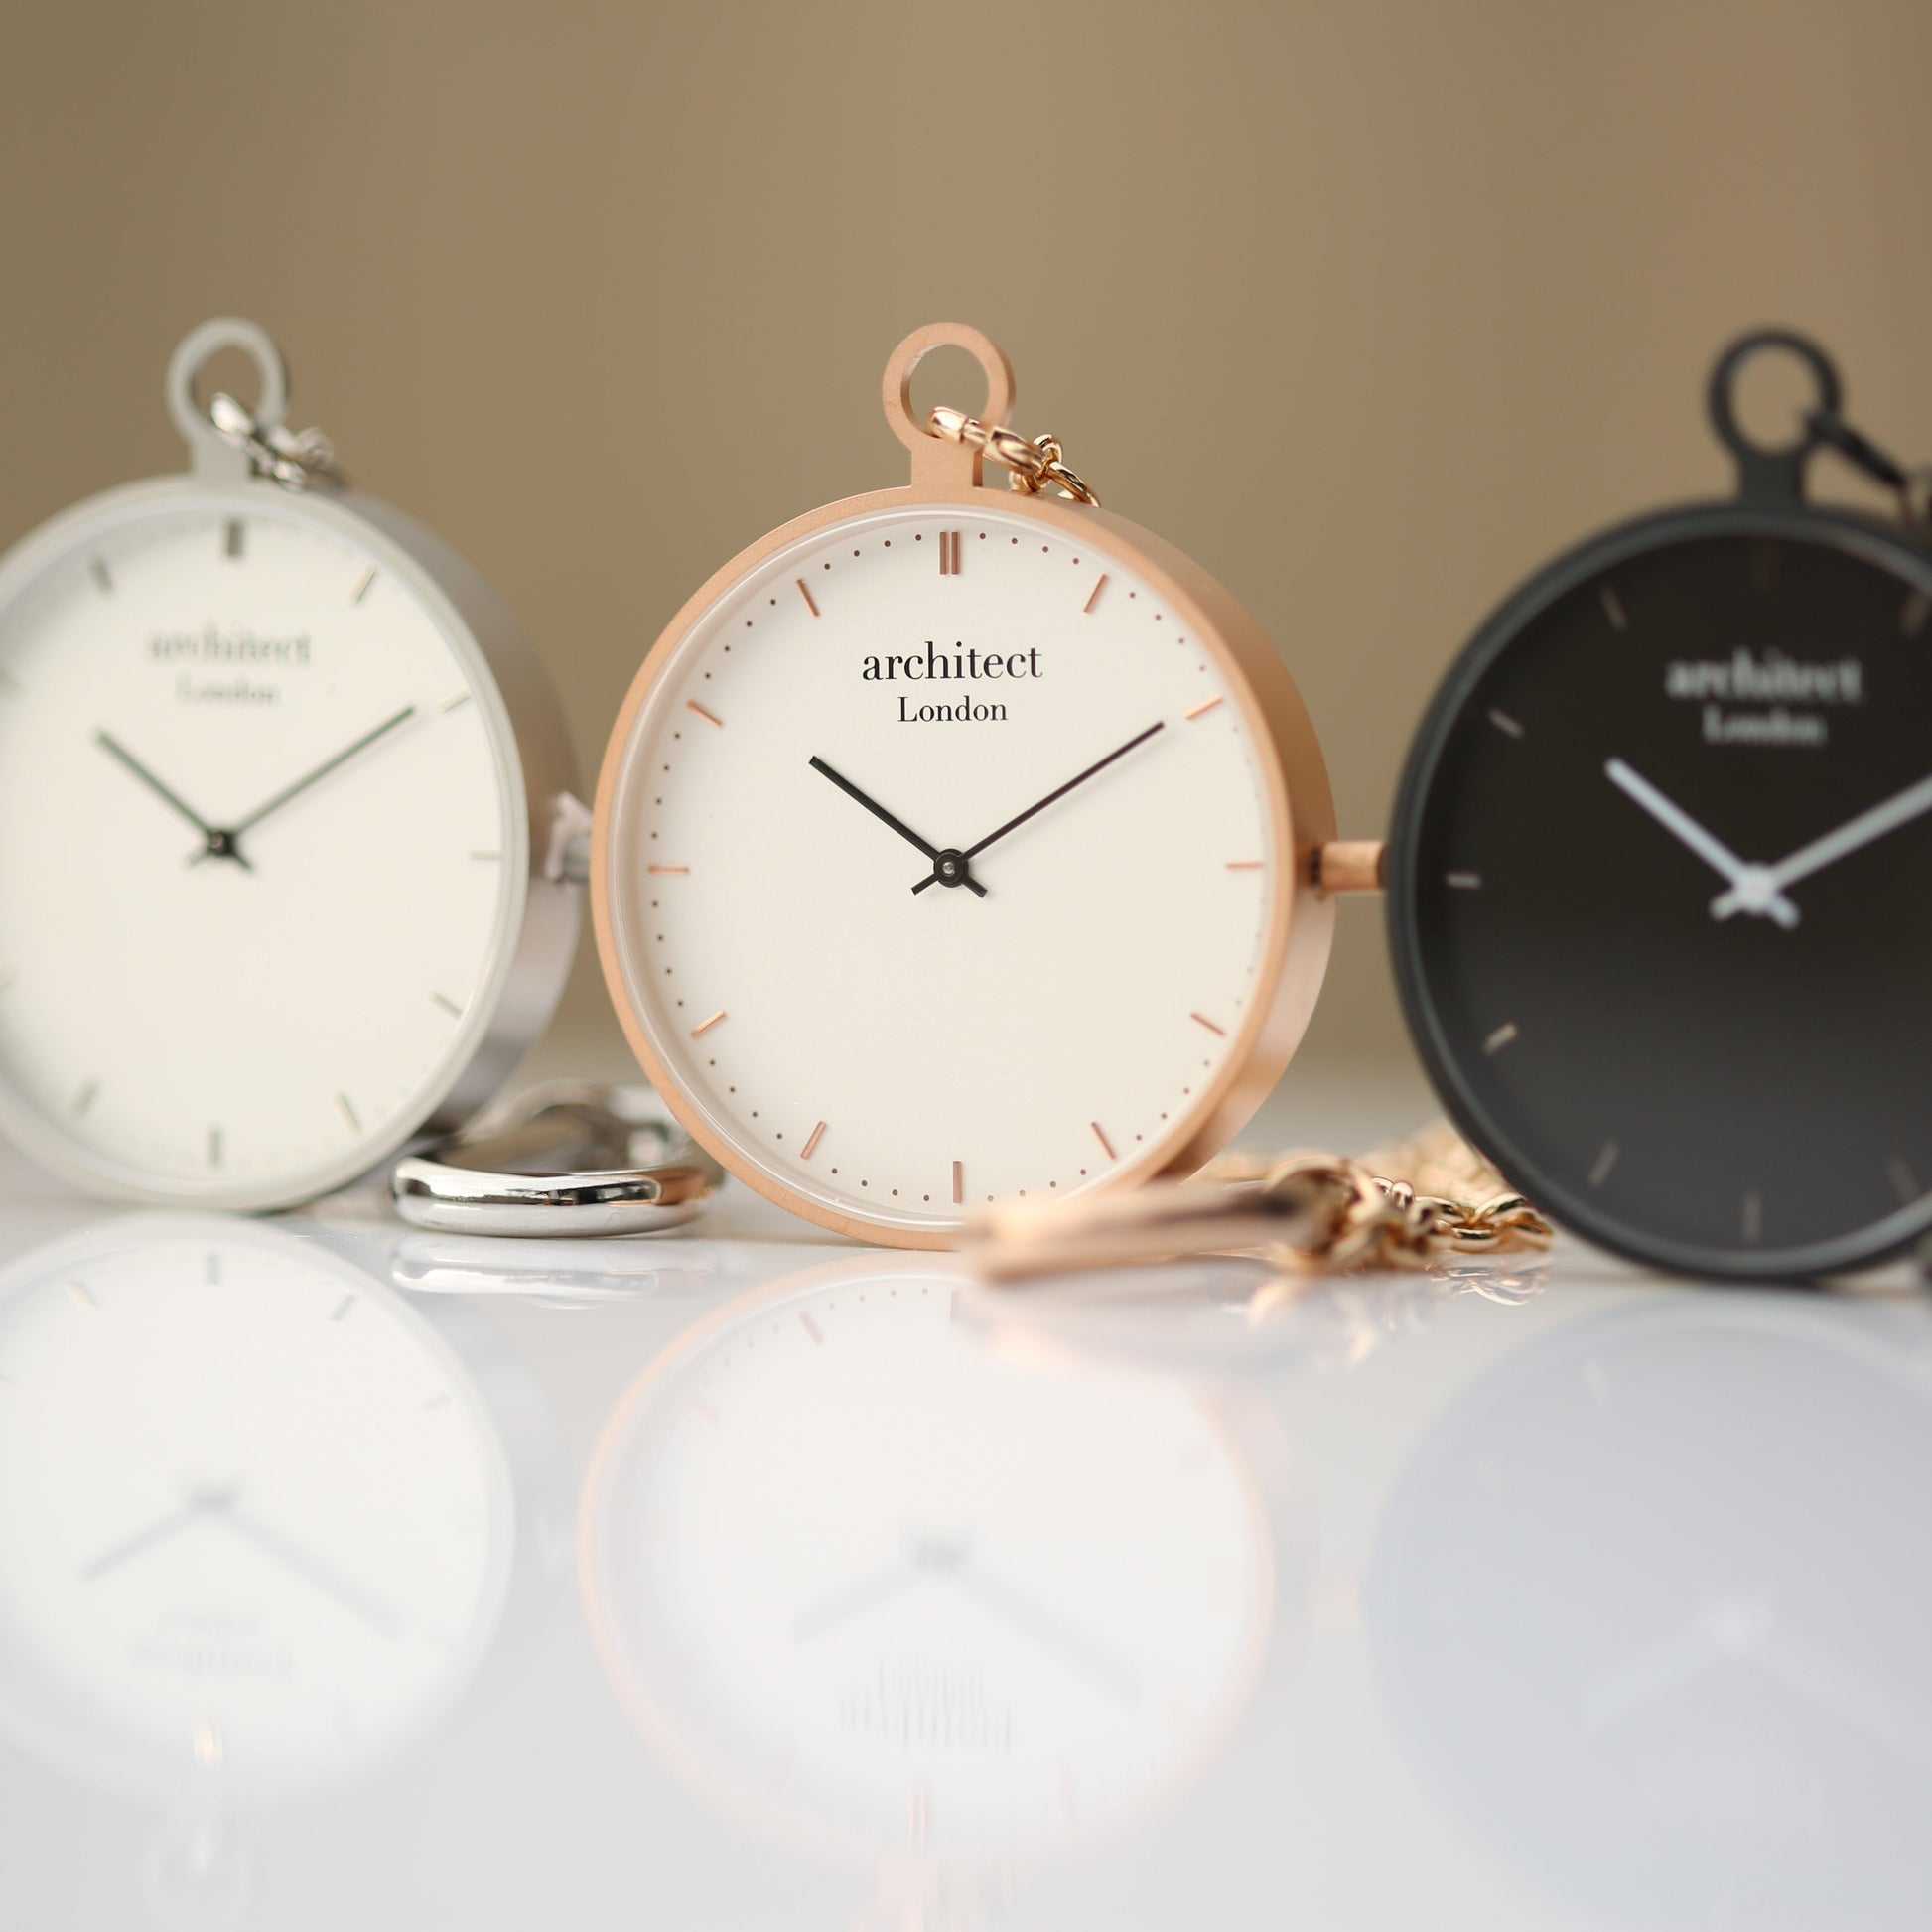 Personalized Pocket Watches - Modern Pocket Watch Silver - Modern Font Engraving 